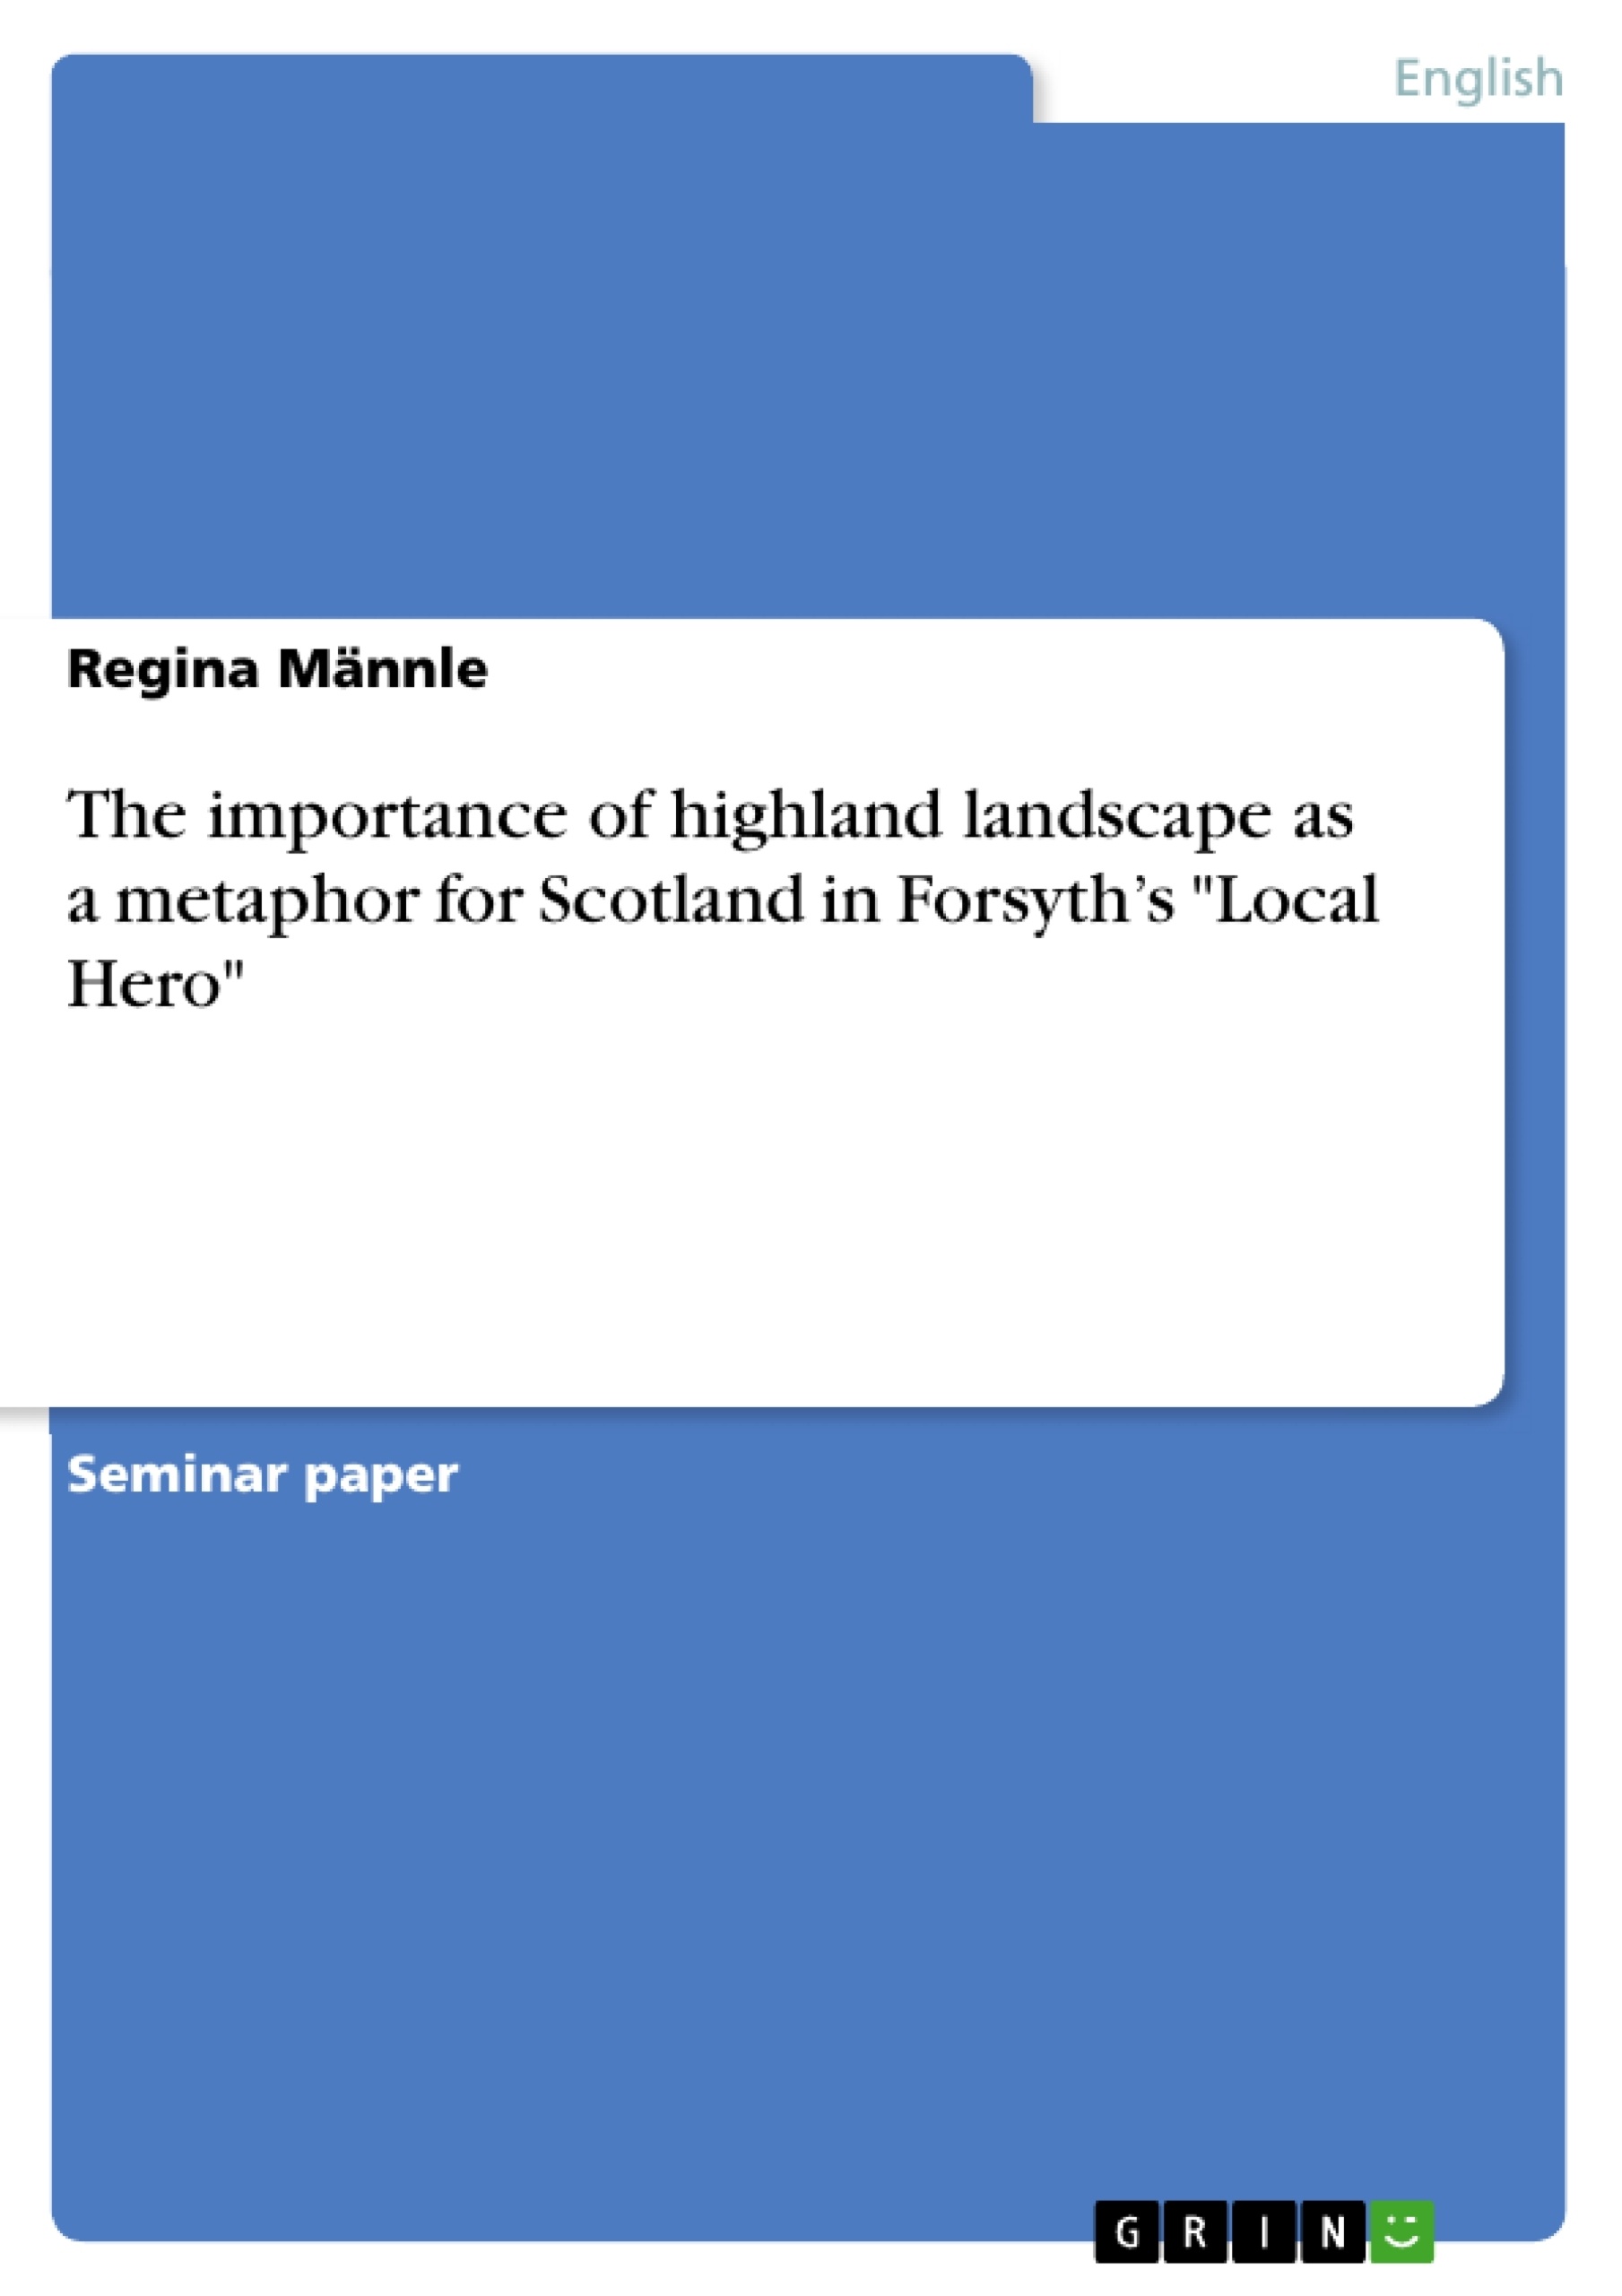 Title: The importance of highland landscape as a metaphor for Scotland in Forsyth’s "Local Hero"